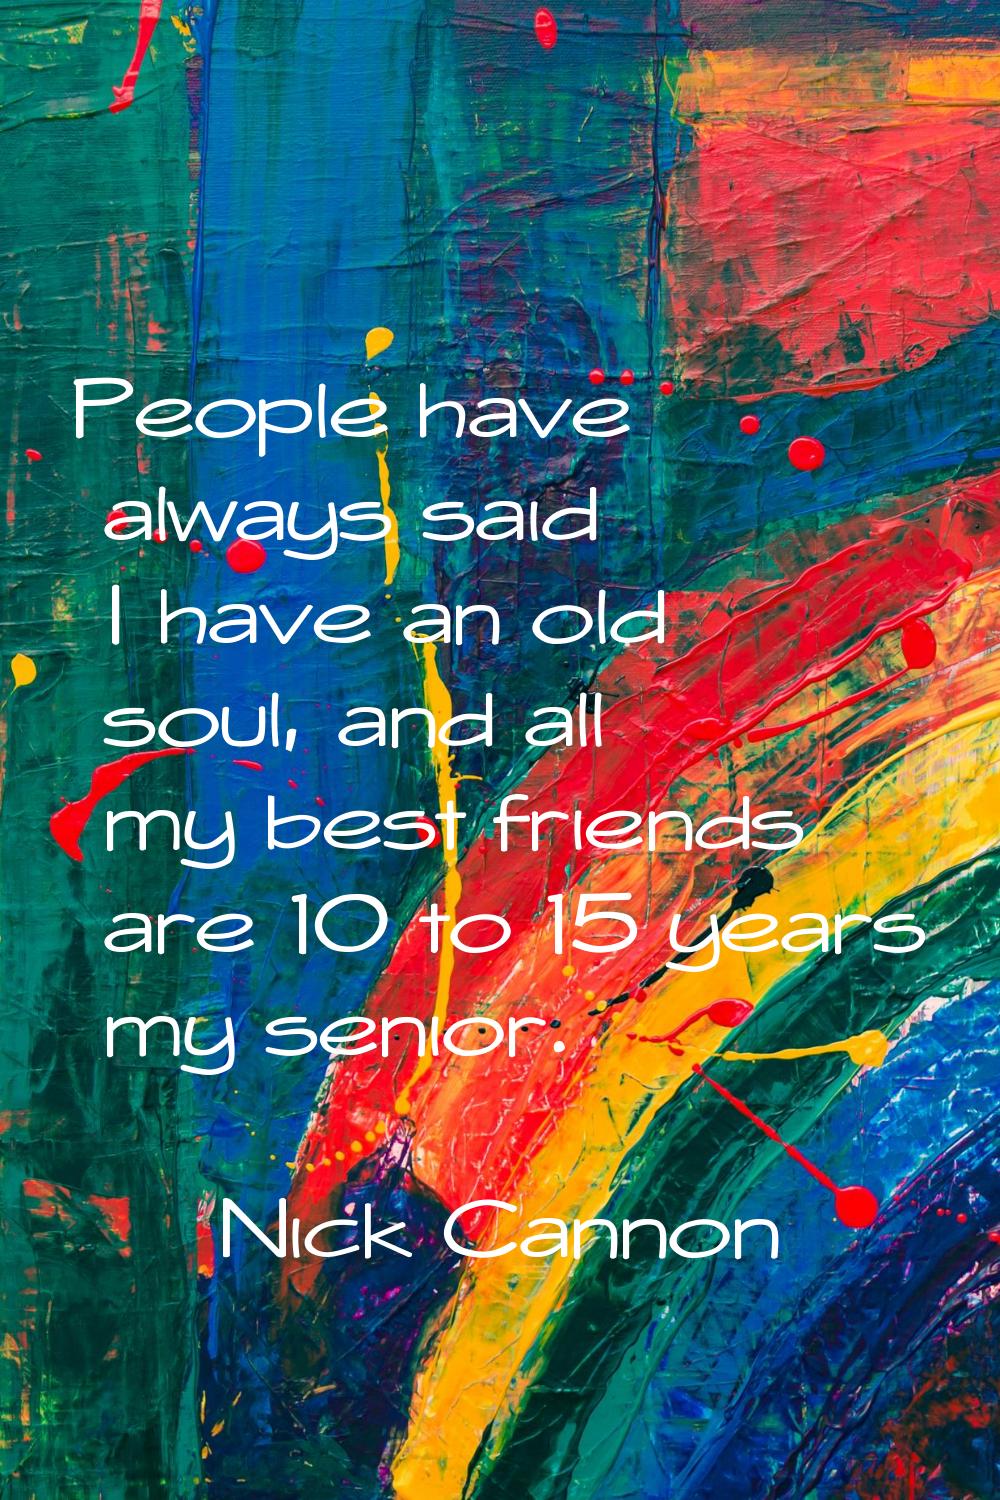 People have always said I have an old soul, and all my best friends are 10 to 15 years my senior.